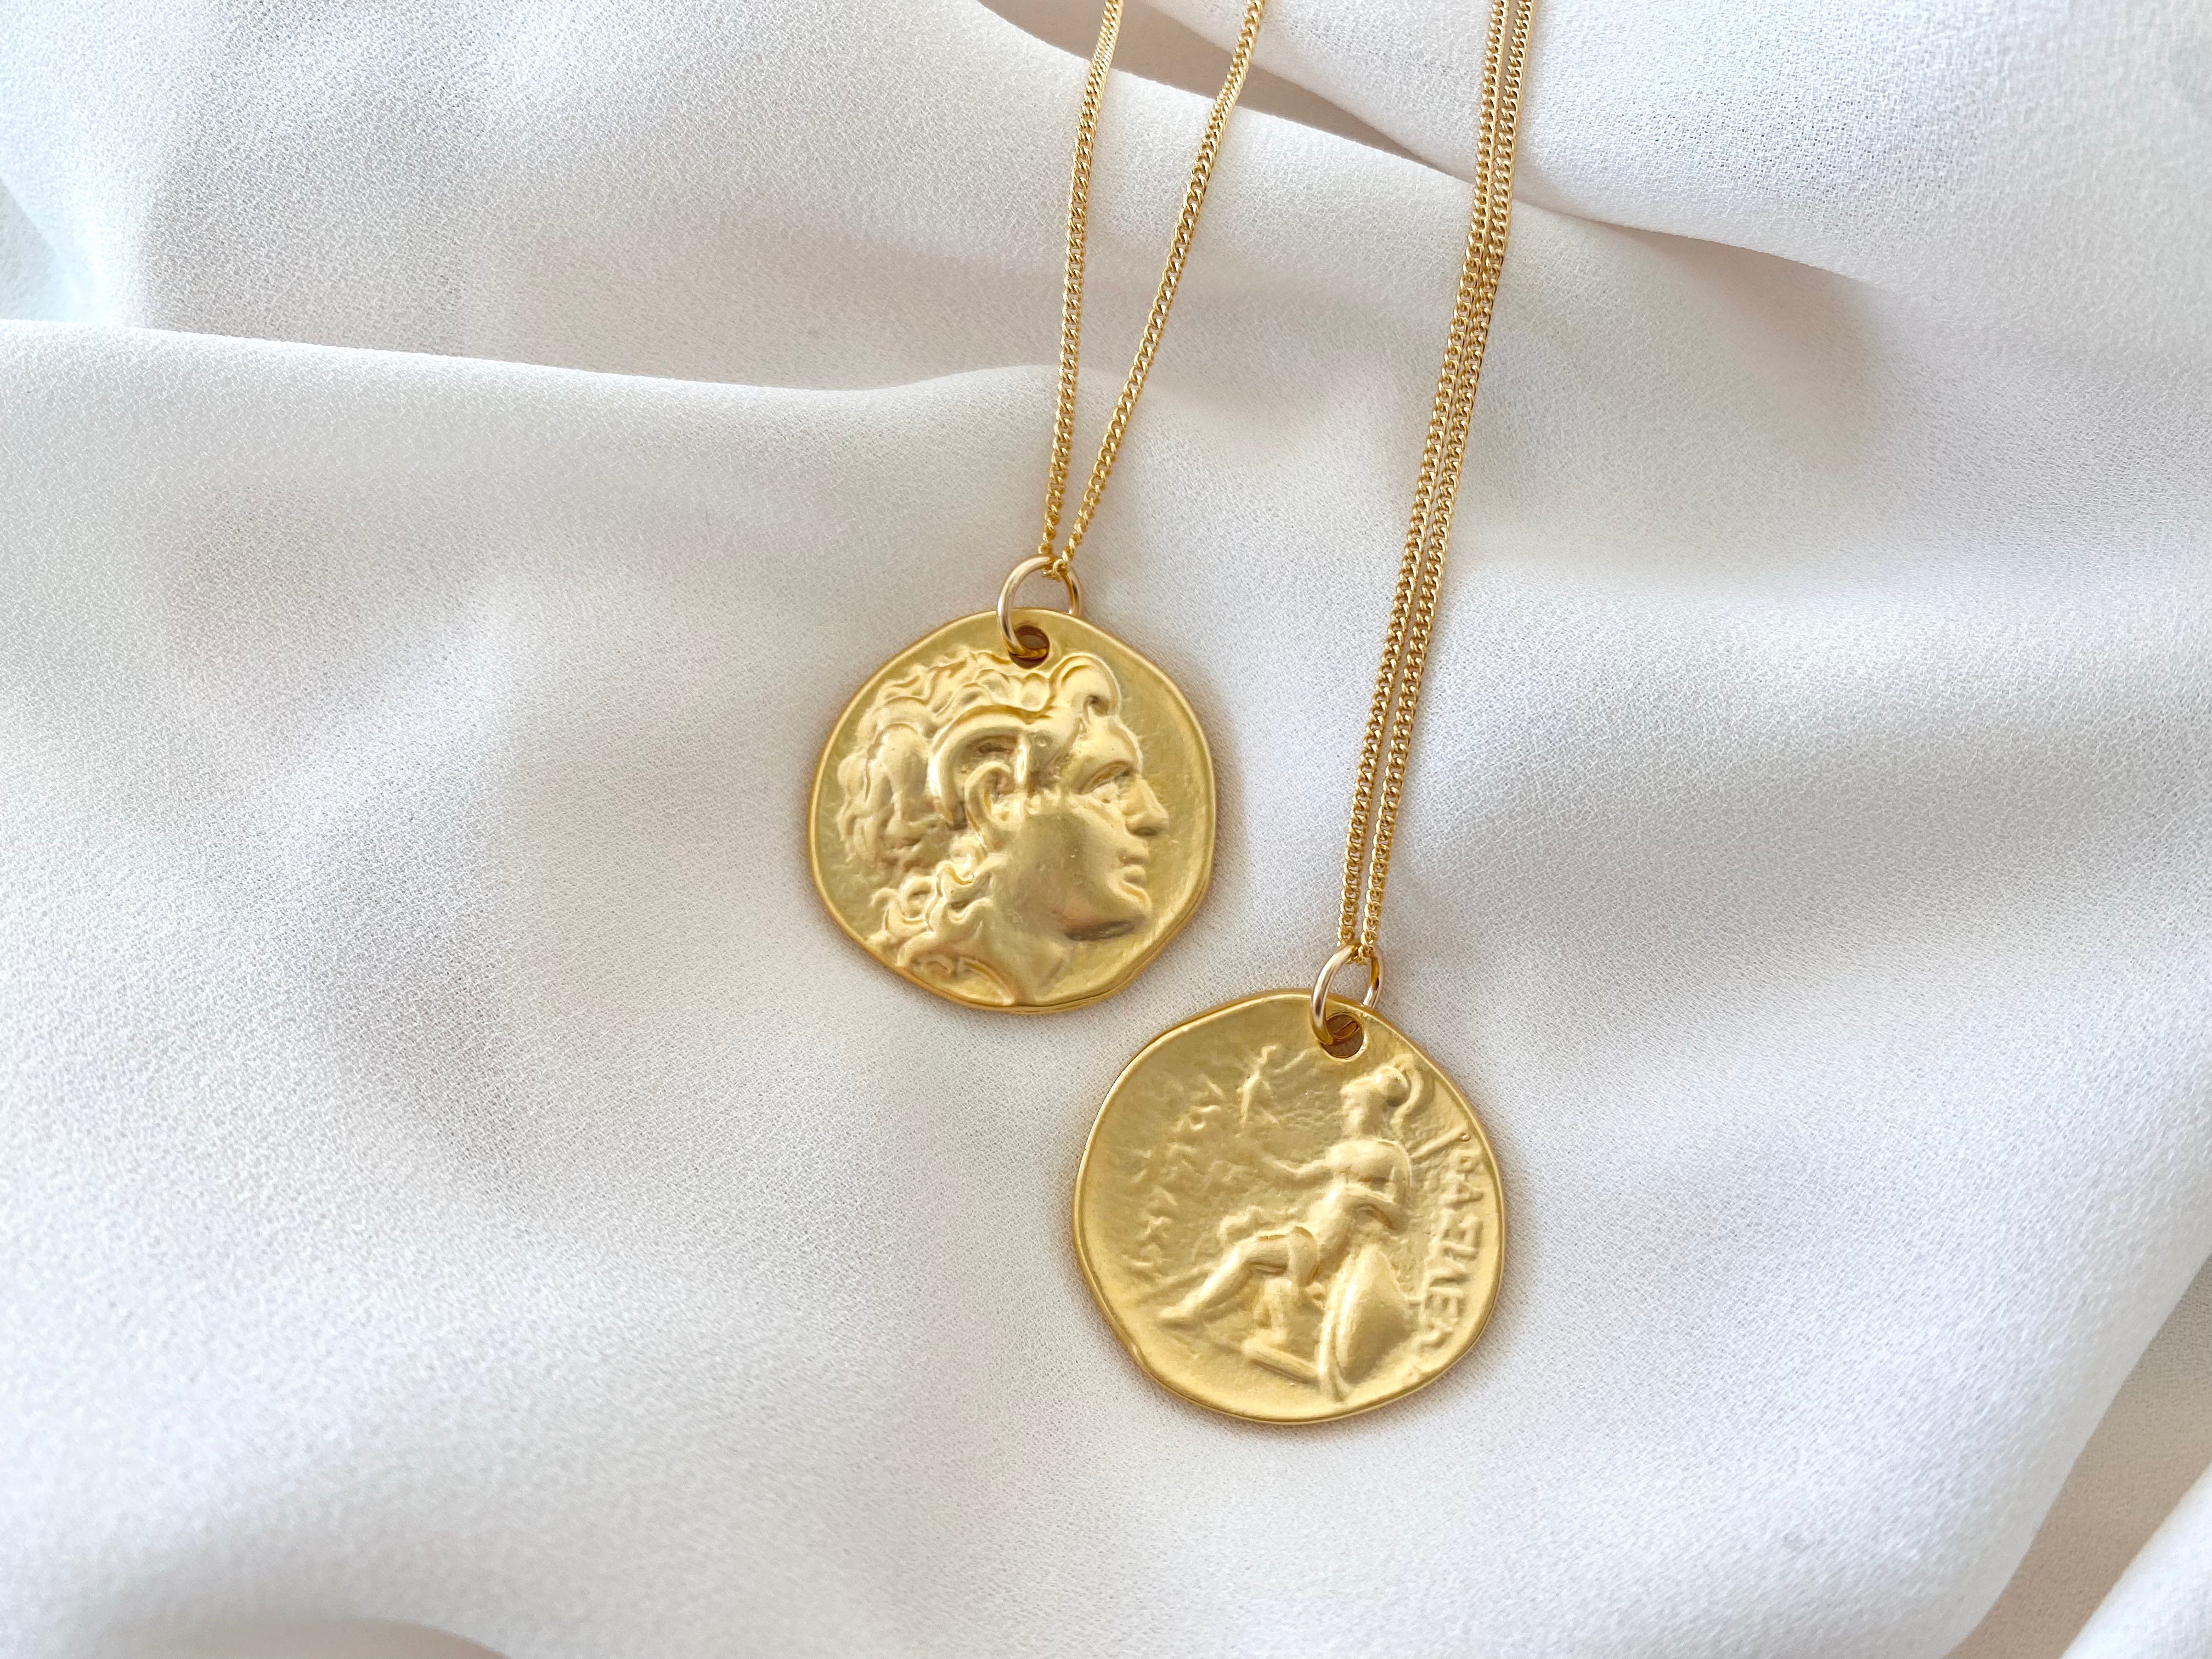 Matte Gold Roman Coin Necklace - Gold Filled Curb Chain